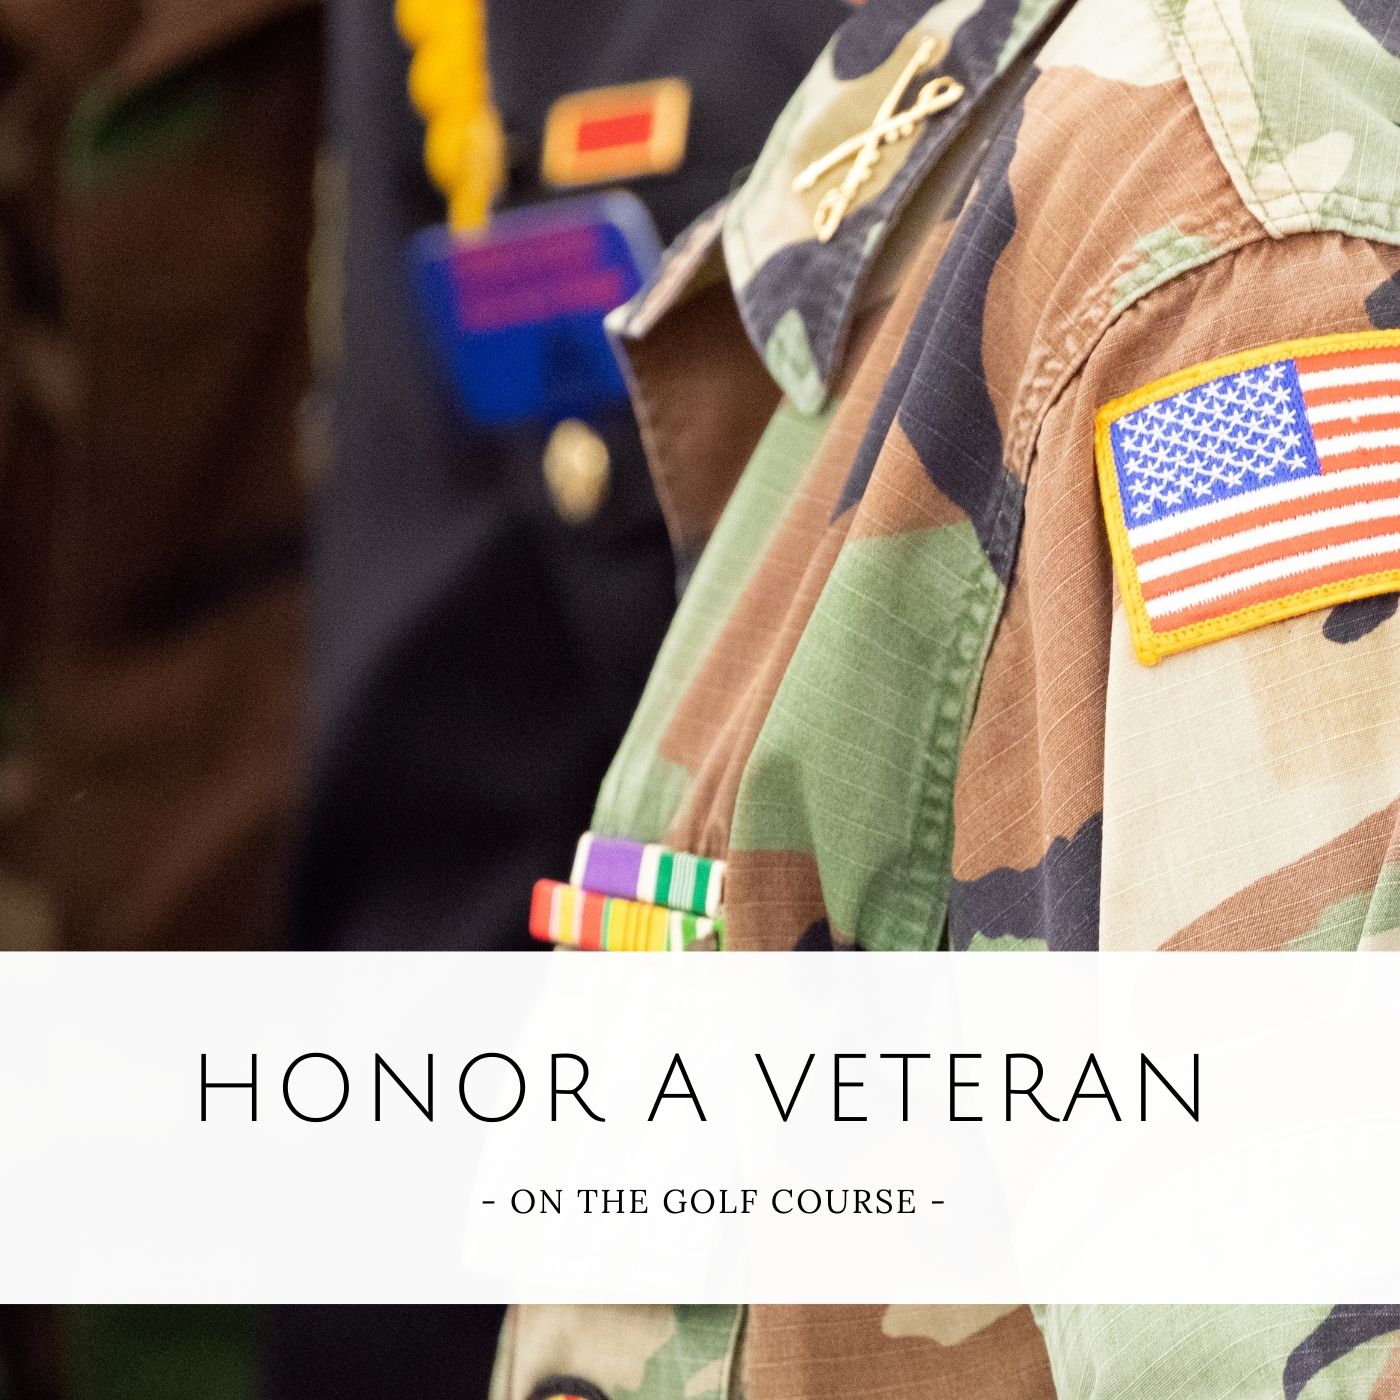 Honor a Veteran on the Golf Course